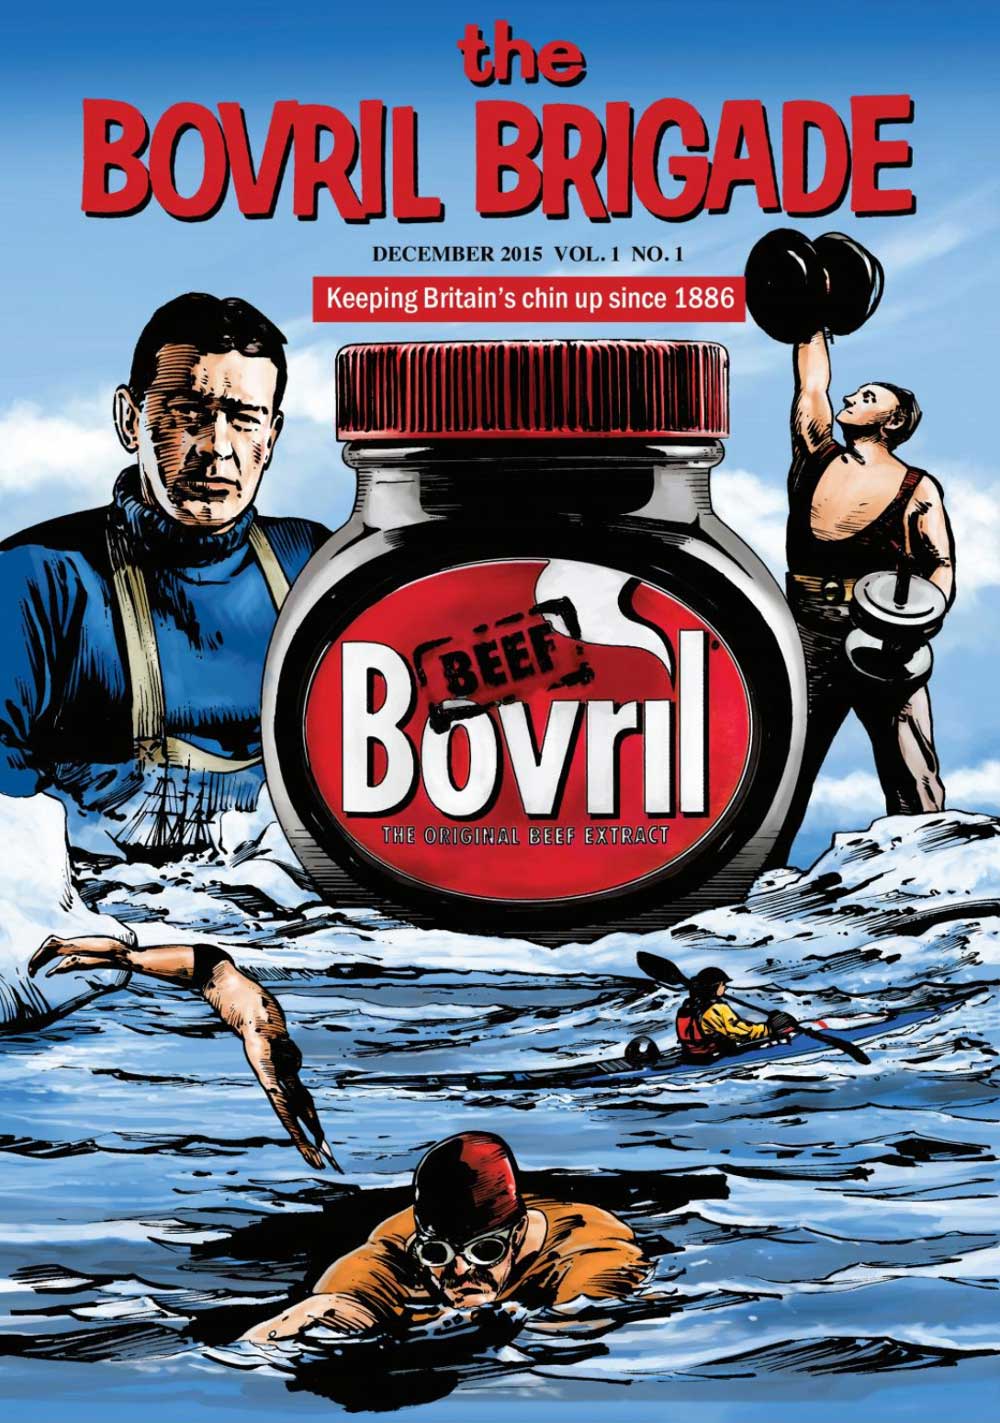 The Bovril Brigade Volume One Issue 1 (2015) - art by Andrew Chiu